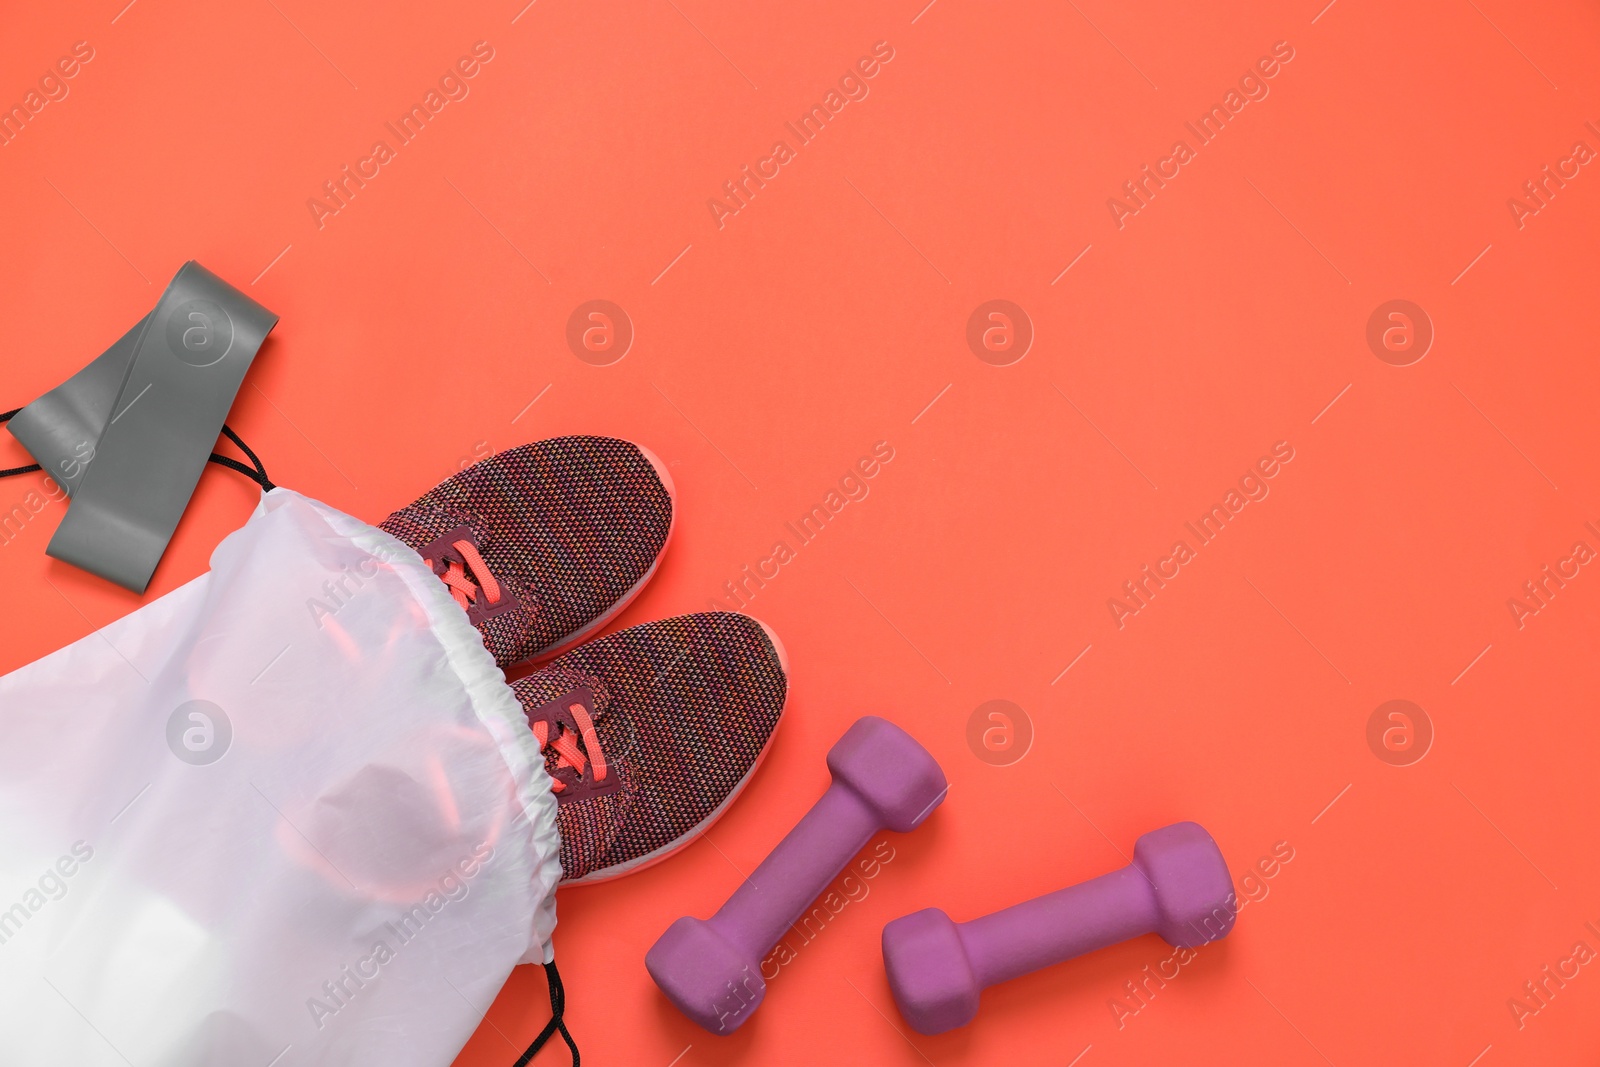 Photo of Drawstring bag, sneakers, fitness elastic band and dumbbells on orange background, flat lay. Space for text